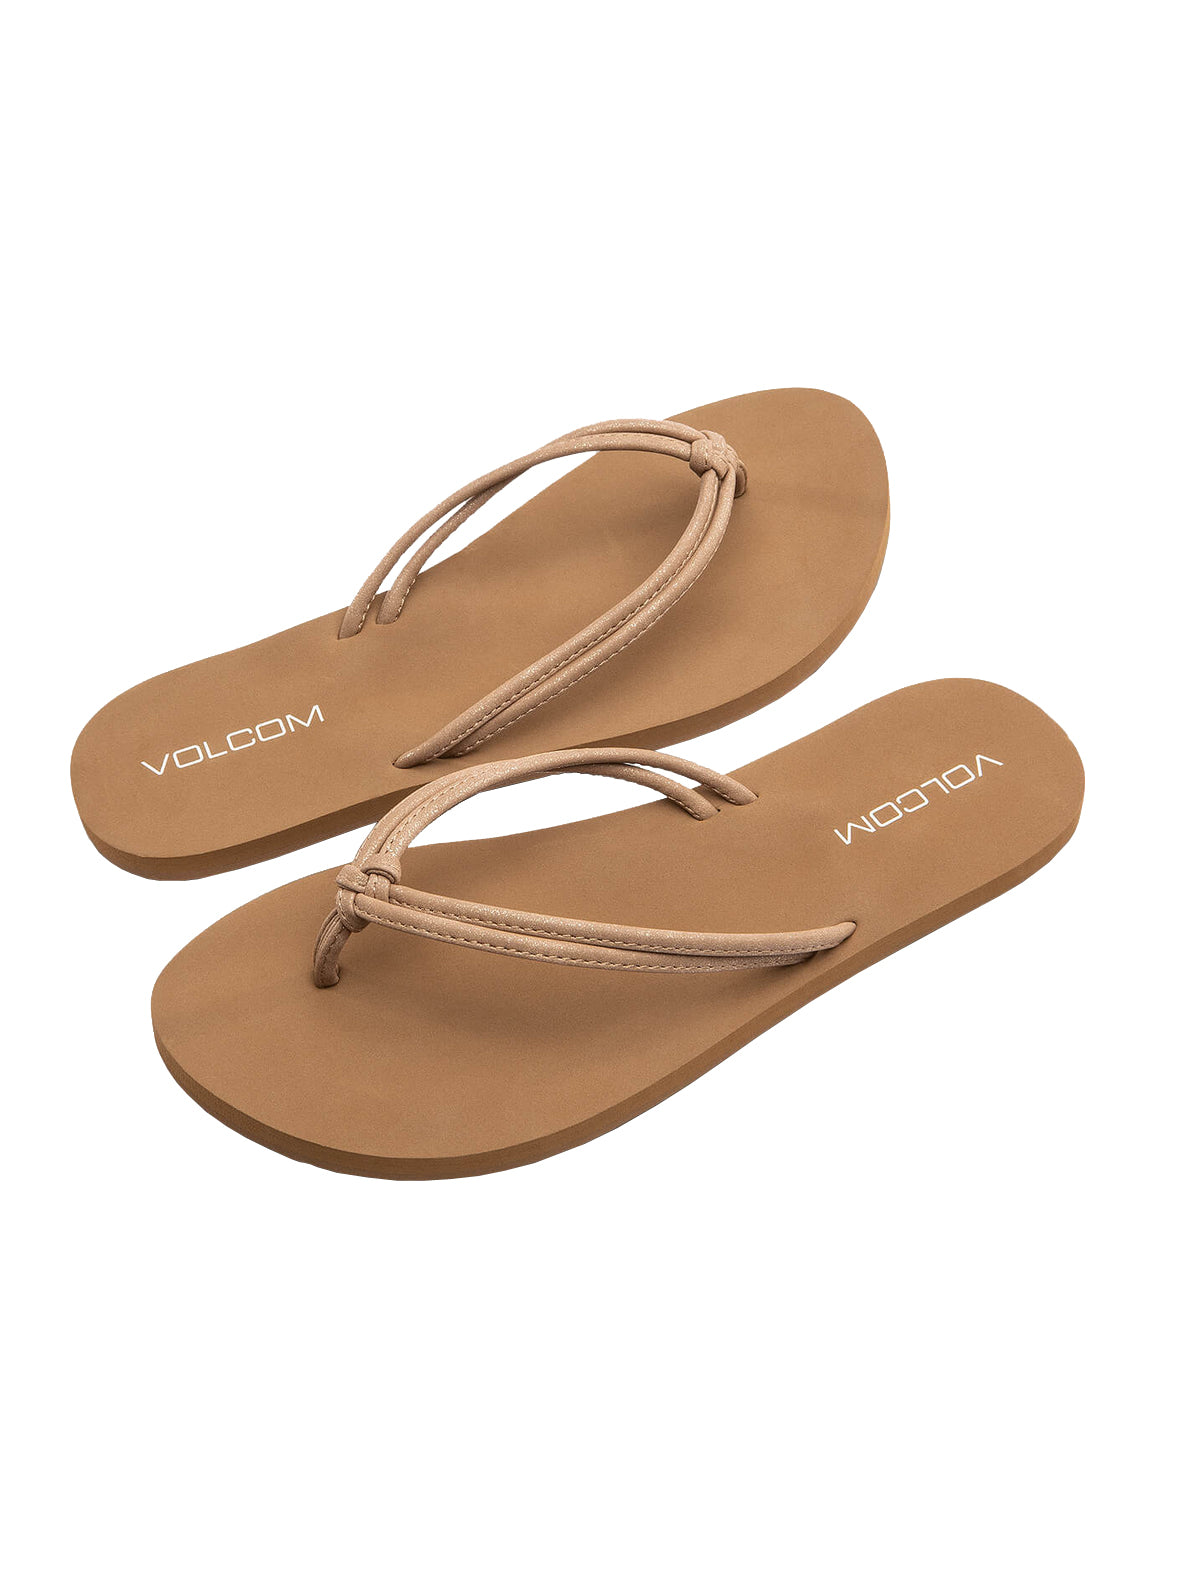 Volcom Forever and Ever 2 Womens Sandal TAN-Tan 10